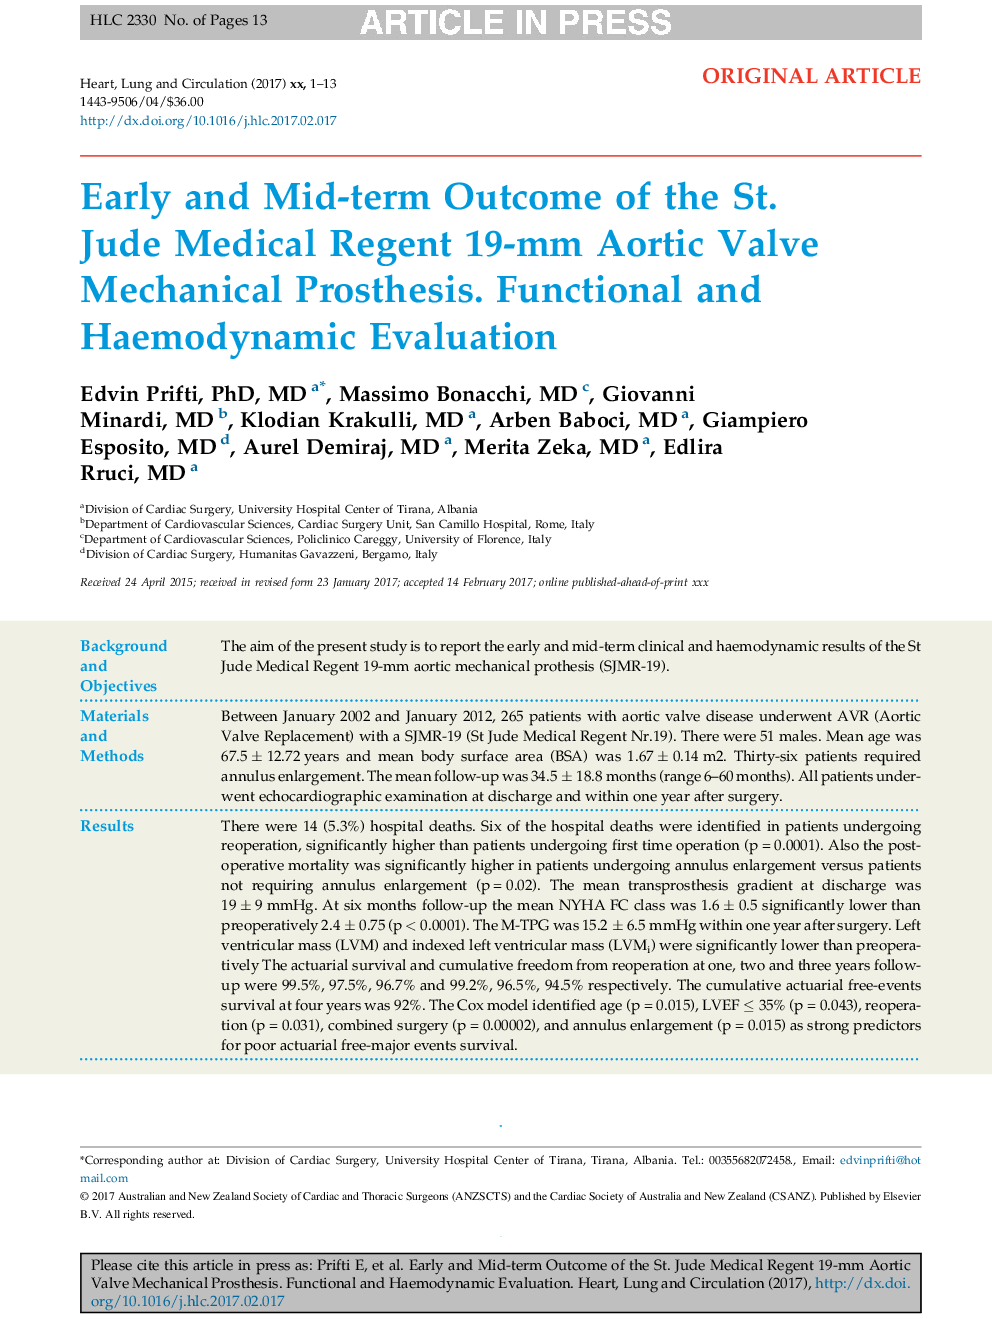 Early and Mid-term Outcome of the St. Jude Medical Regent 19-mm Aortic Valve Mechanical Prosthesis. Functional and Haemodynamic Evaluation